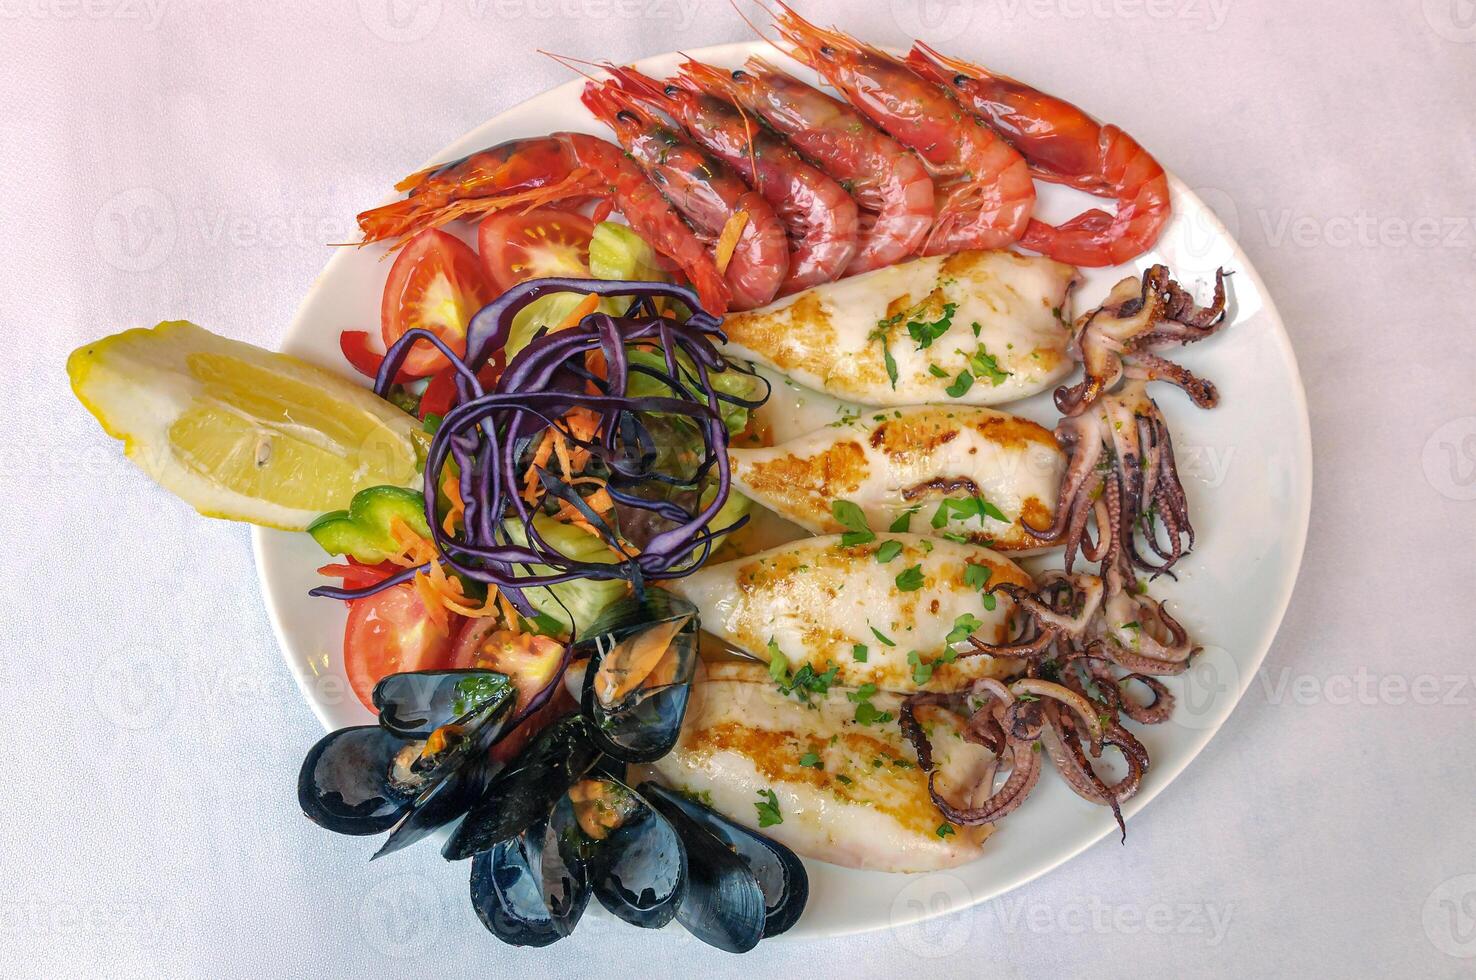 Plate with grilled seafood. Mussels, cuttlefish, shrimp, lemon photo